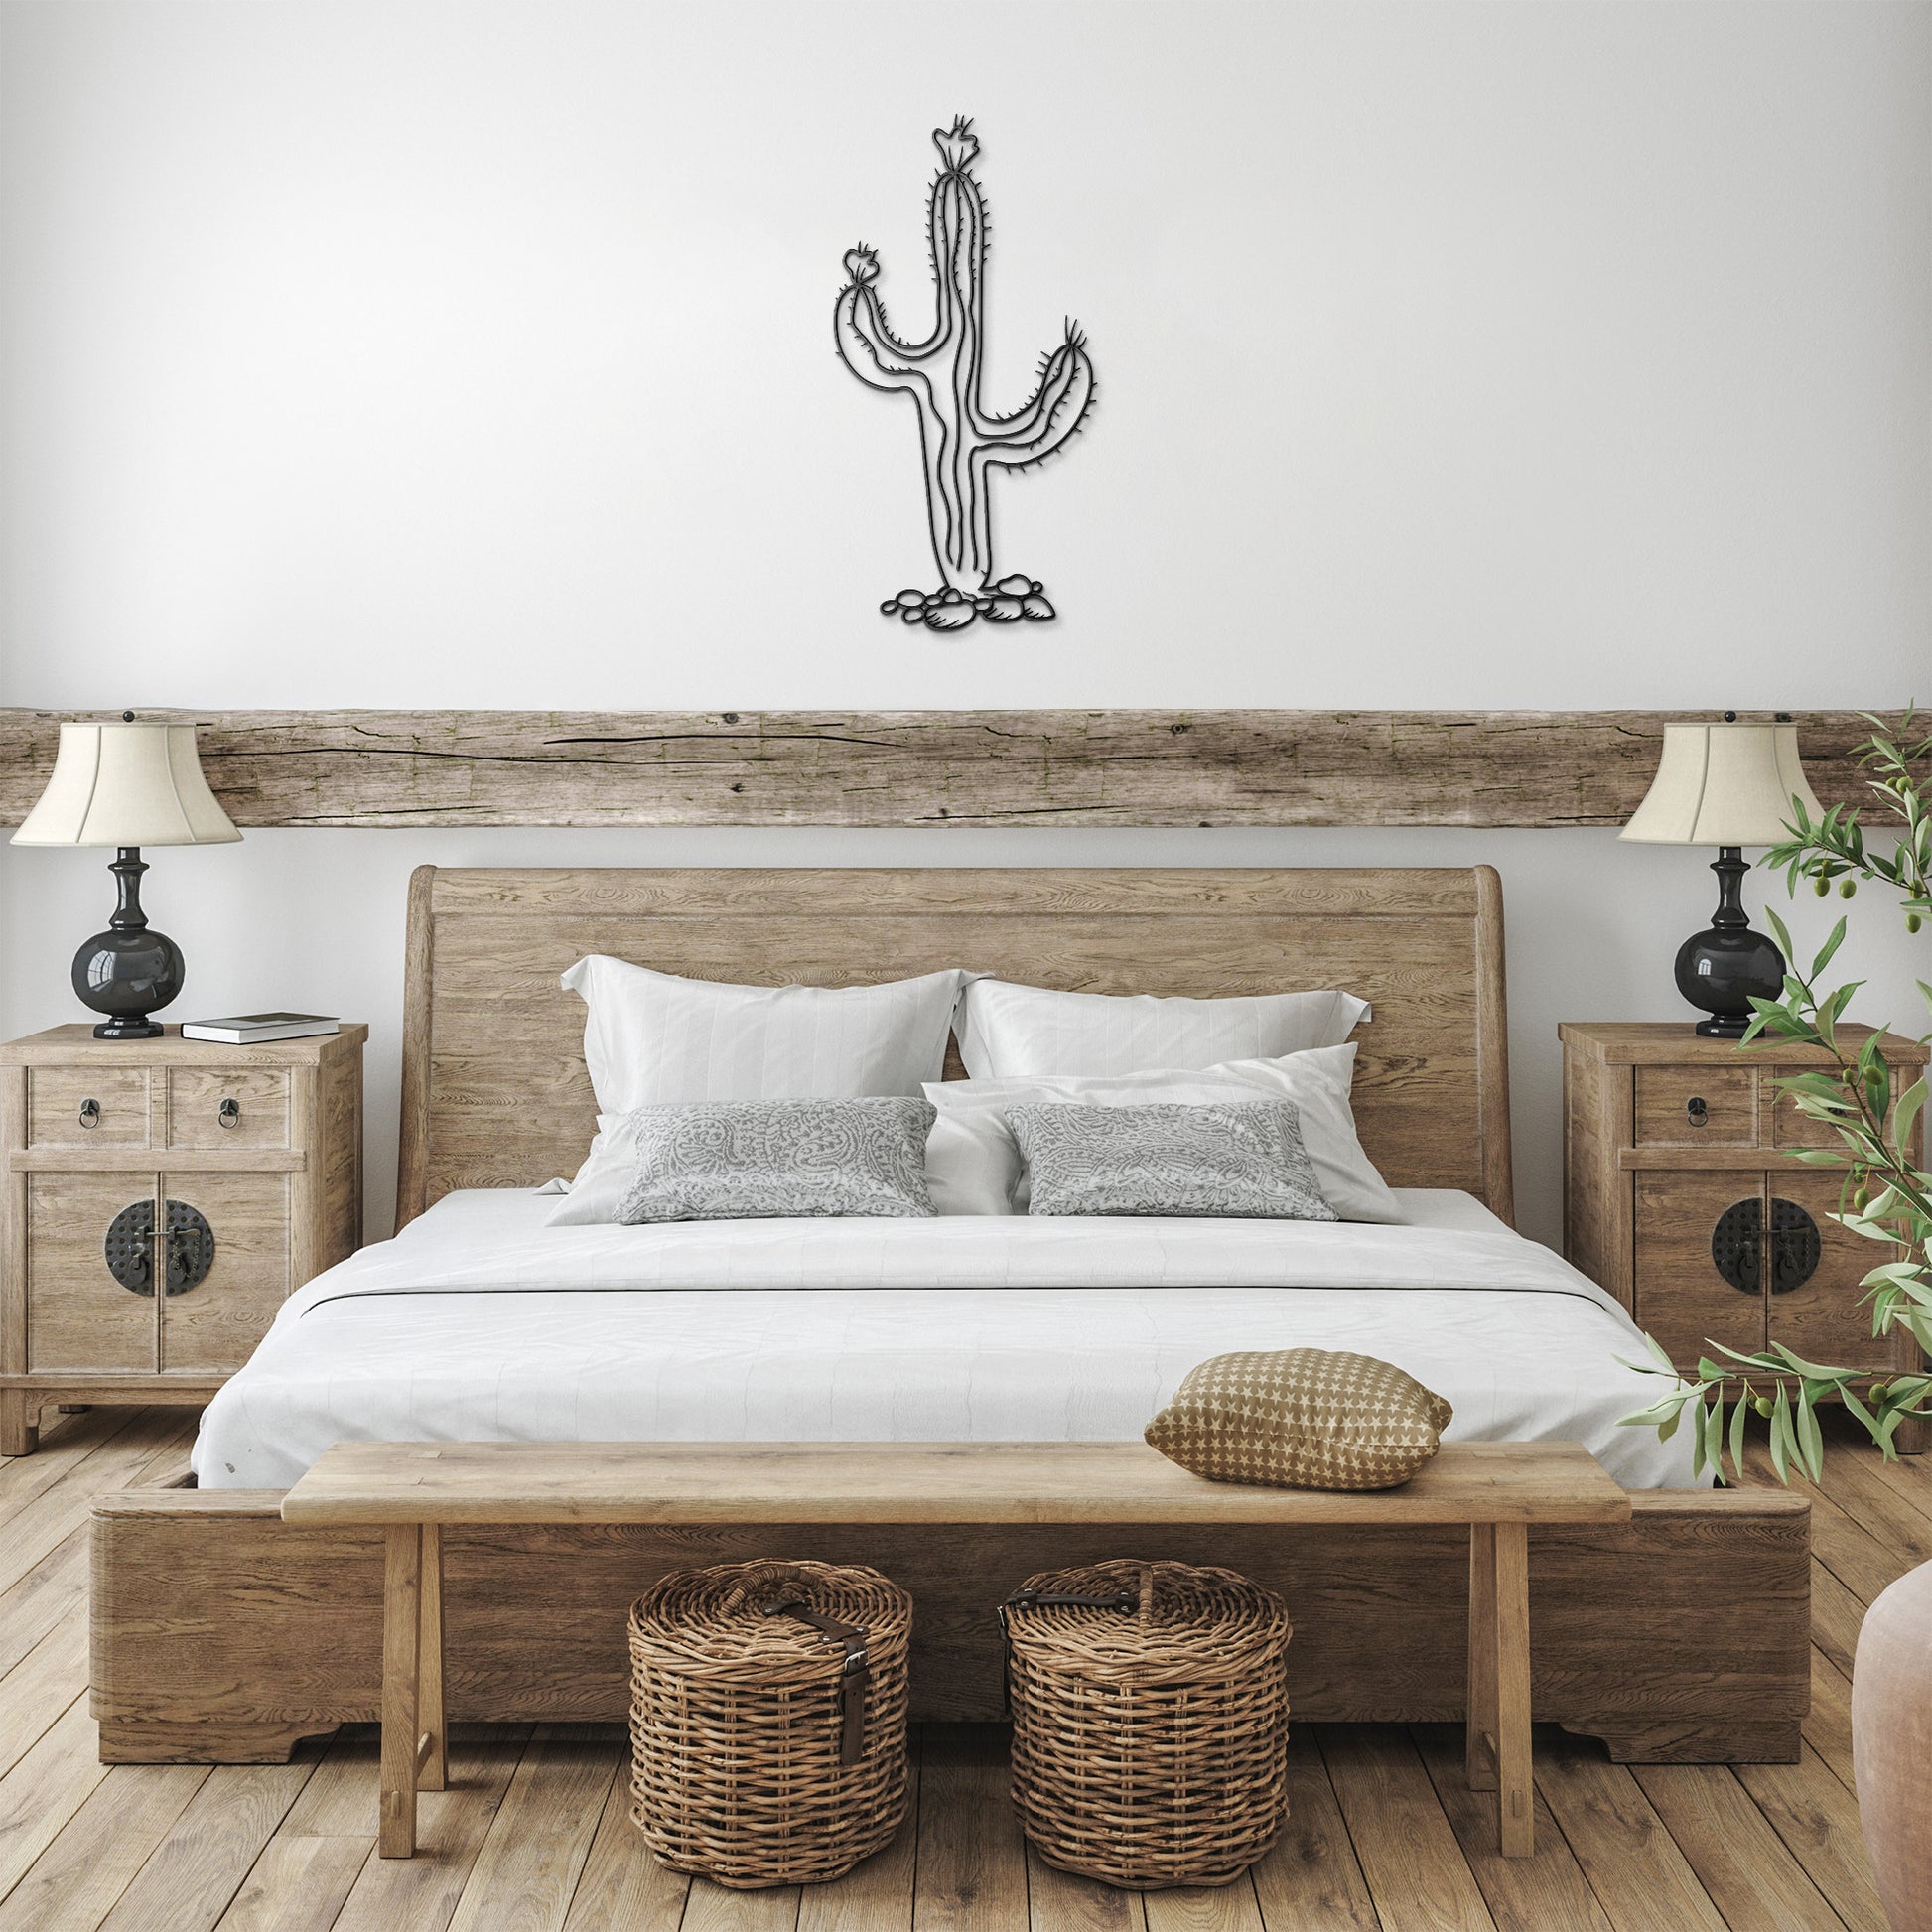 "Cactus" Metal Wall Art - Weave Got Gifts - Unique Gifts You Won’t Find Anywhere Else!